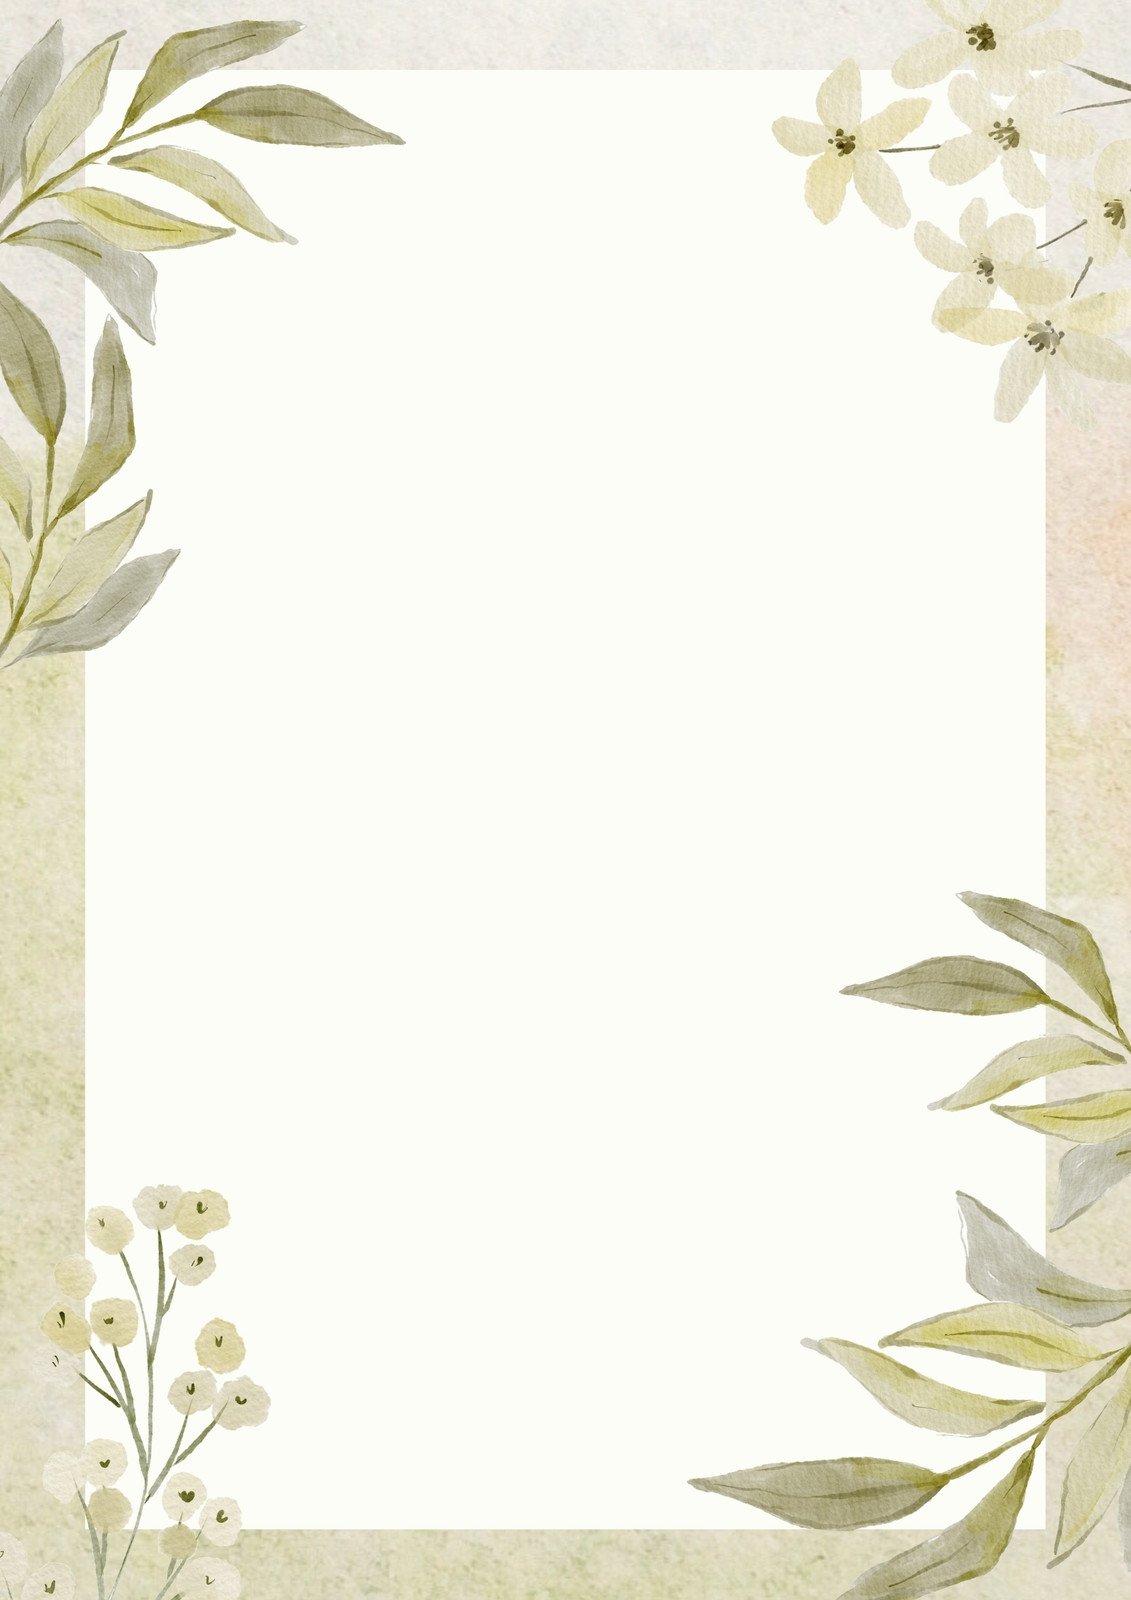 details-100-background-with-border-design-abzlocal-mx